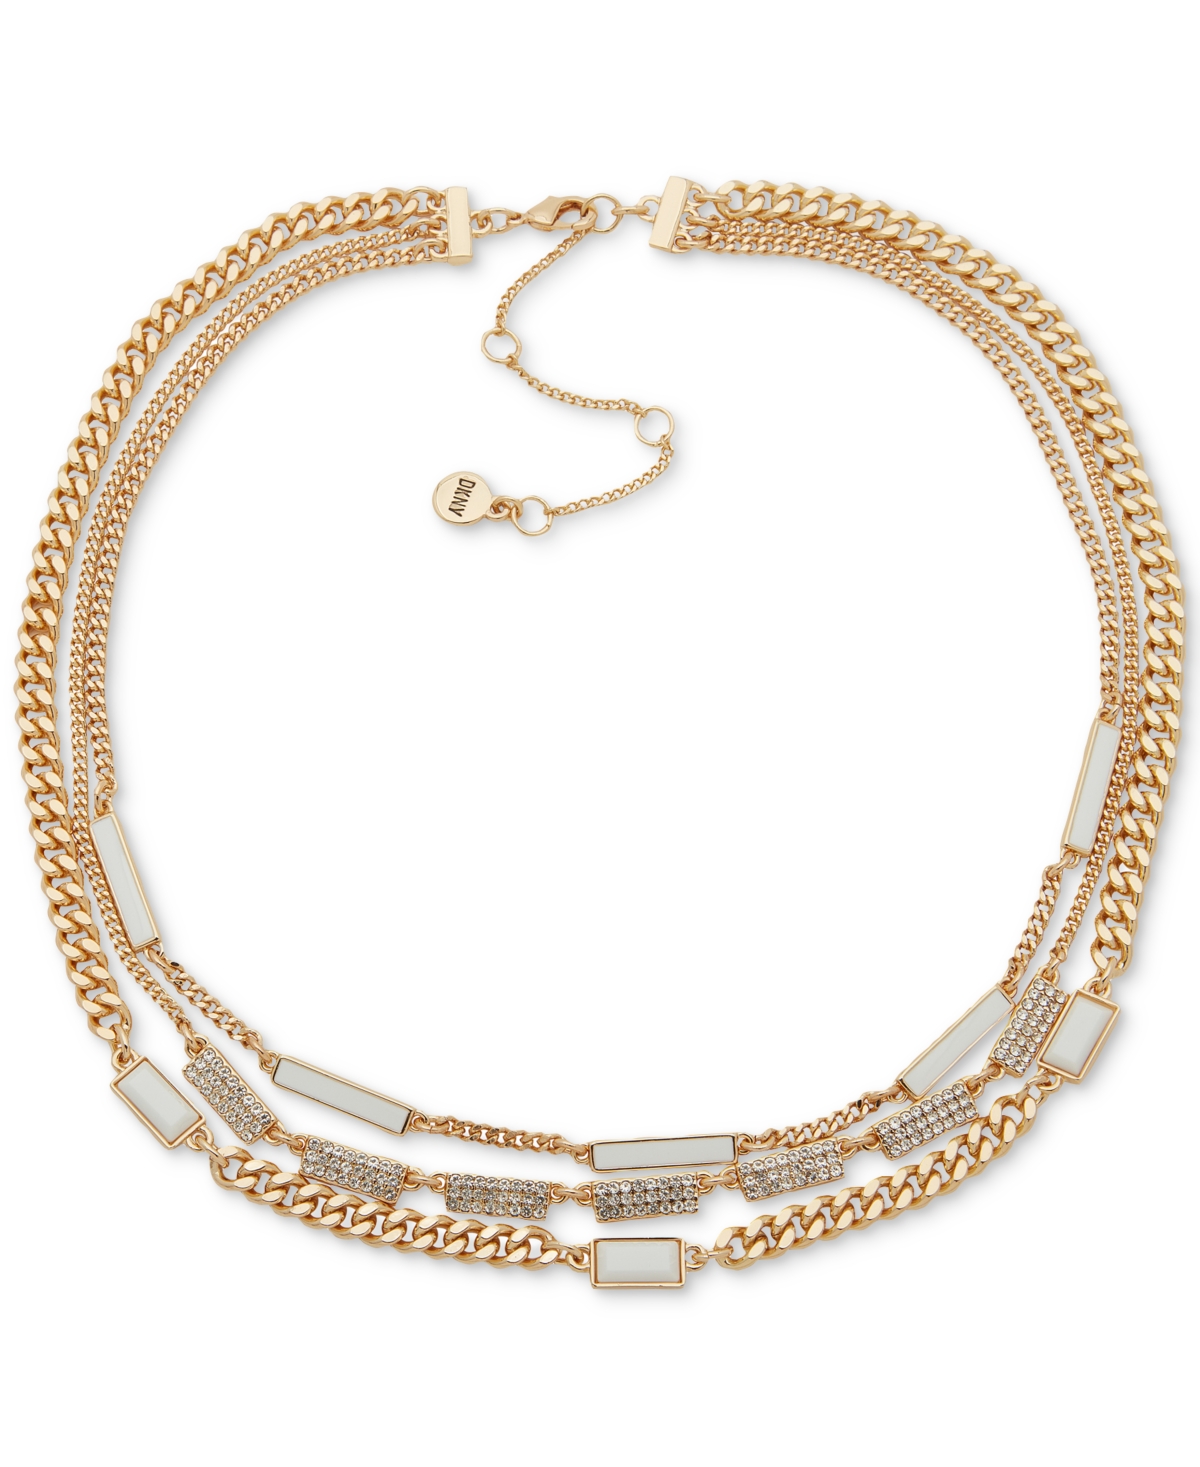 Dkny Gold-tone Pave & Color Stone Layered Necklace, 16" + 3" Extender